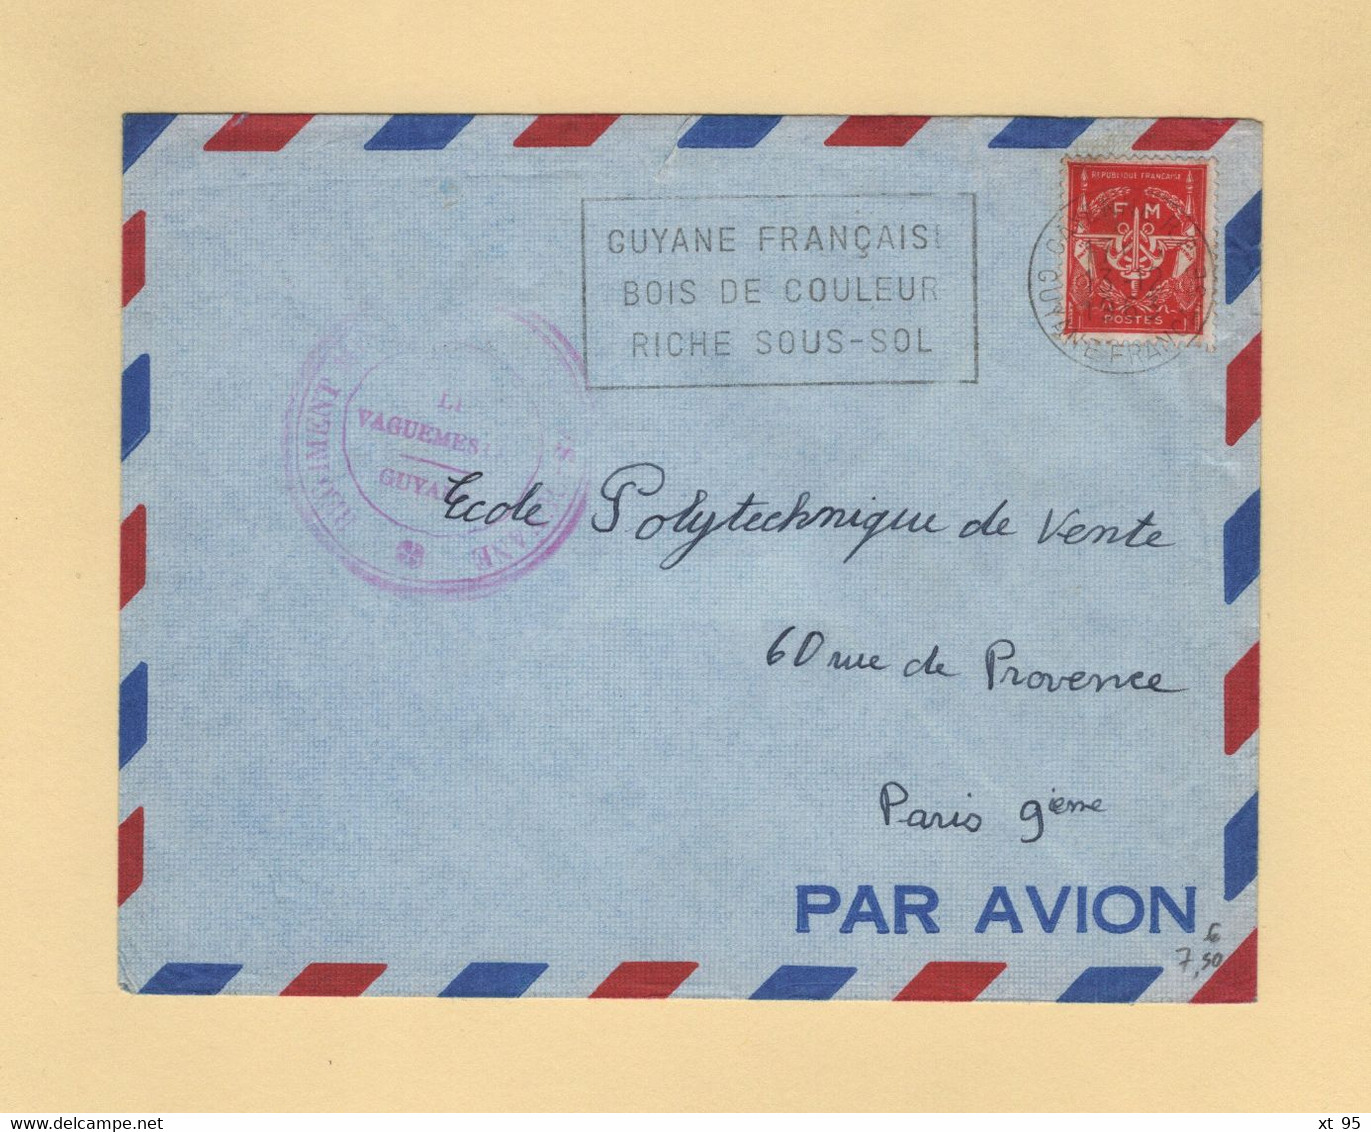 Timbre FM - Guyane - Cayenne - Regiment D Infanterie Marine - Military Postage Stamps